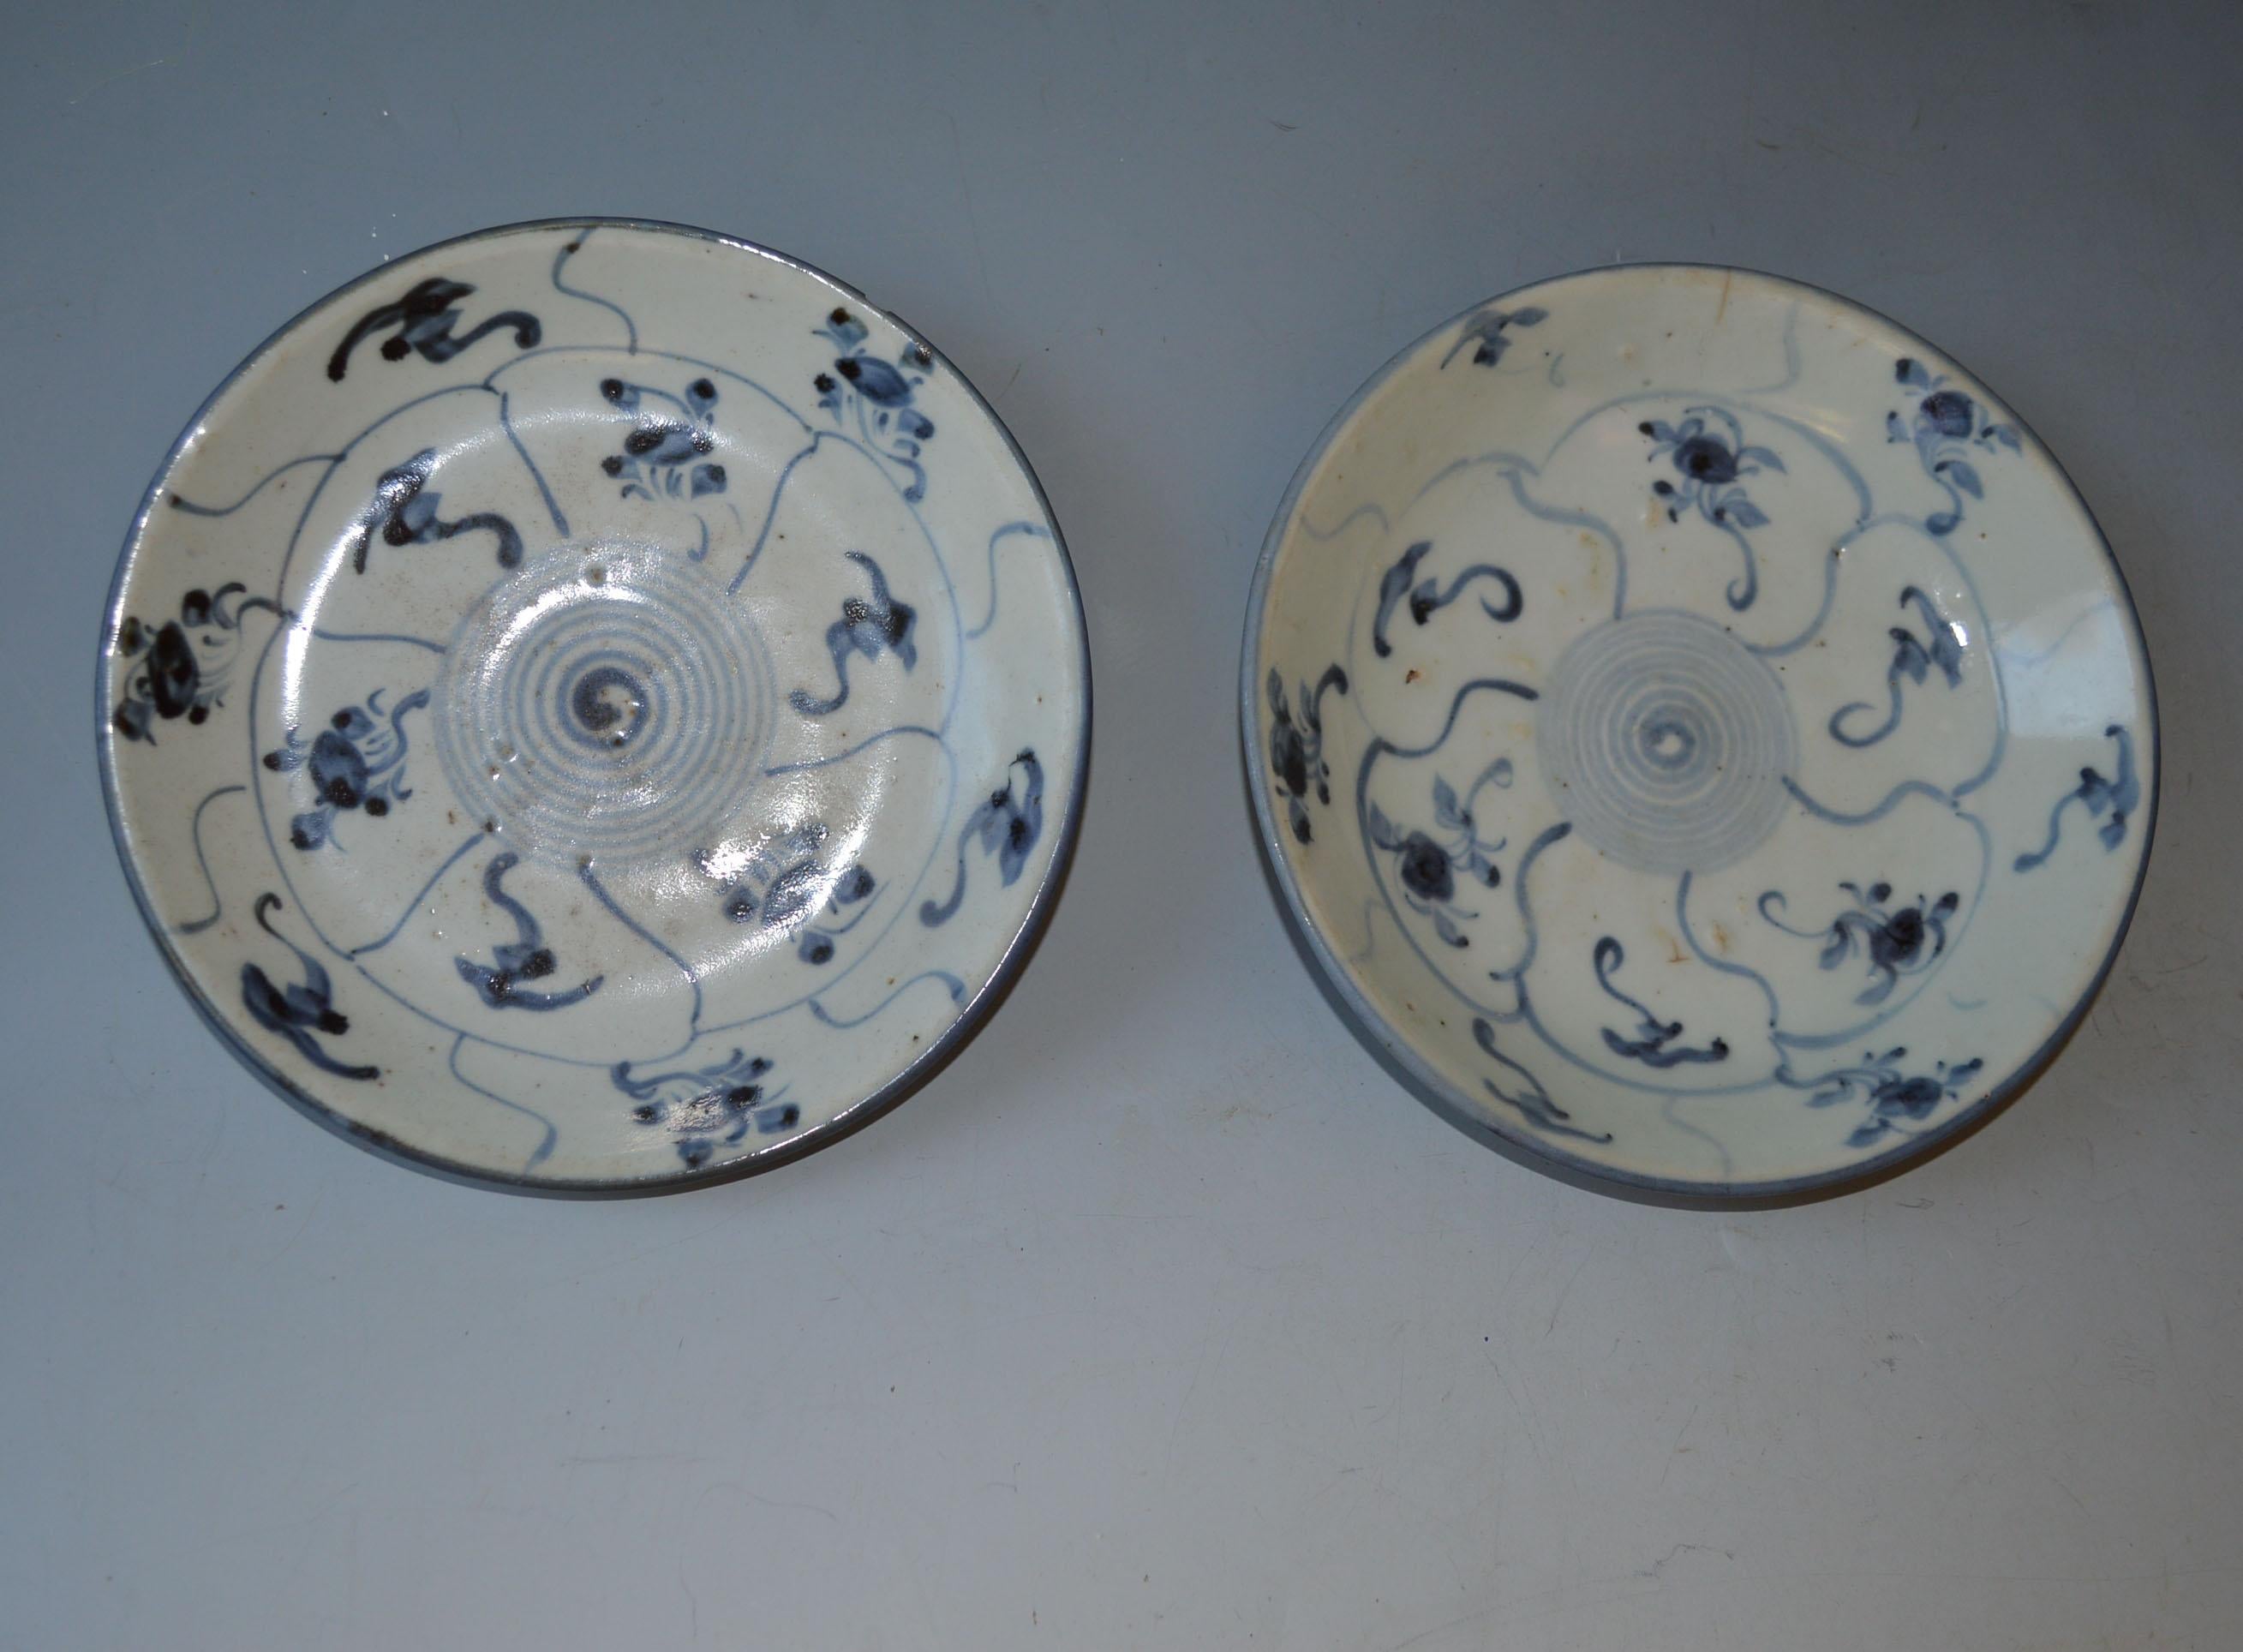 2 Antique Chinese provincial porcelain plates ming dynasty circa 16th century 
Hand painted heavy porcelain with a pleasing central spiral motive with floral and swirling designs in cobalt blue on white, in a rather naïve form typical of Chinese